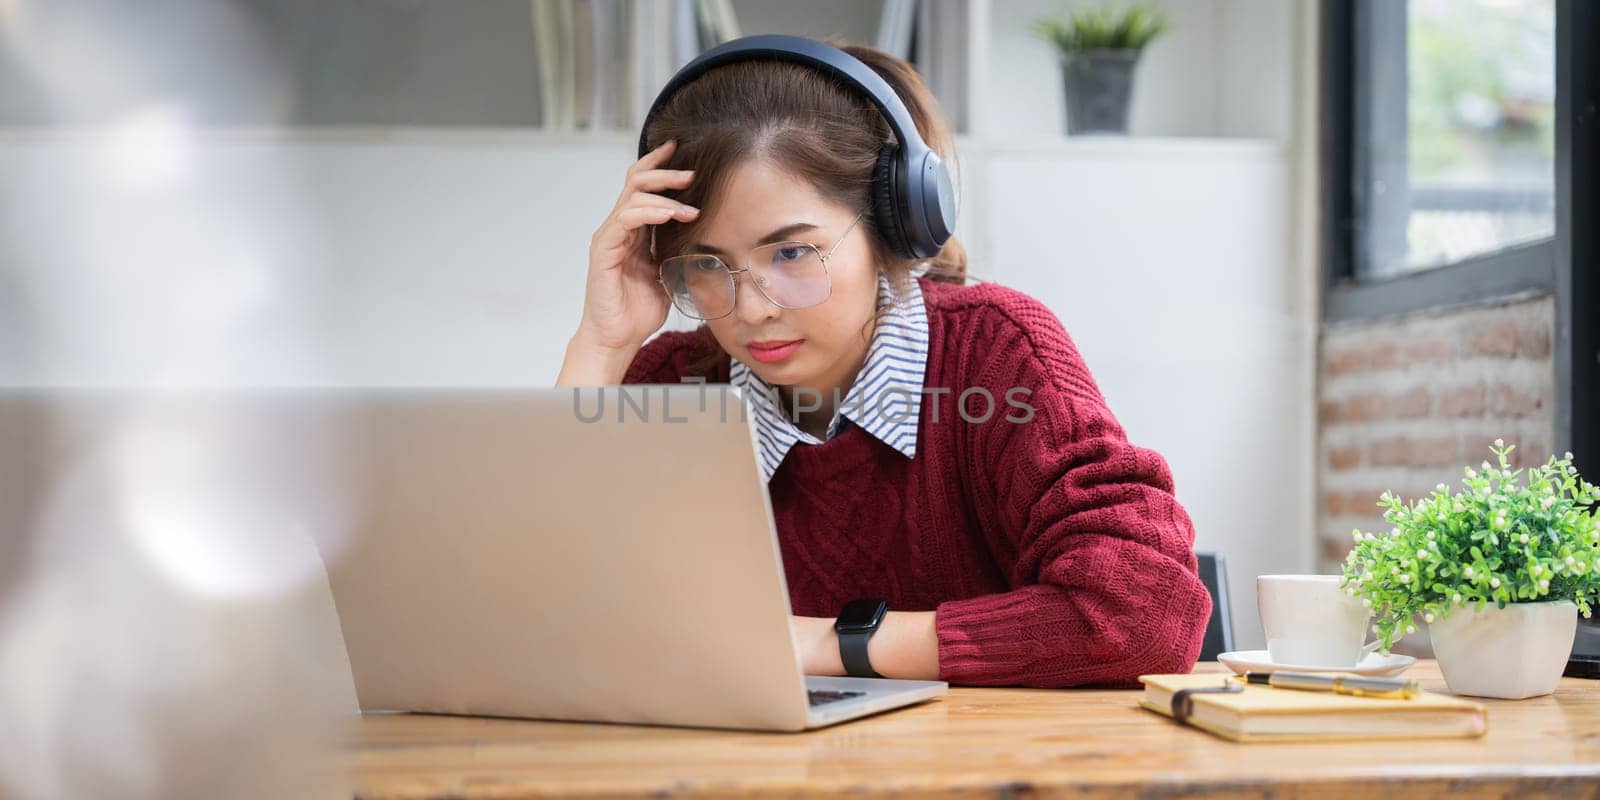 Asian college student at home wearing red shirt using laptop attending online university class listening with headphones by nateemee